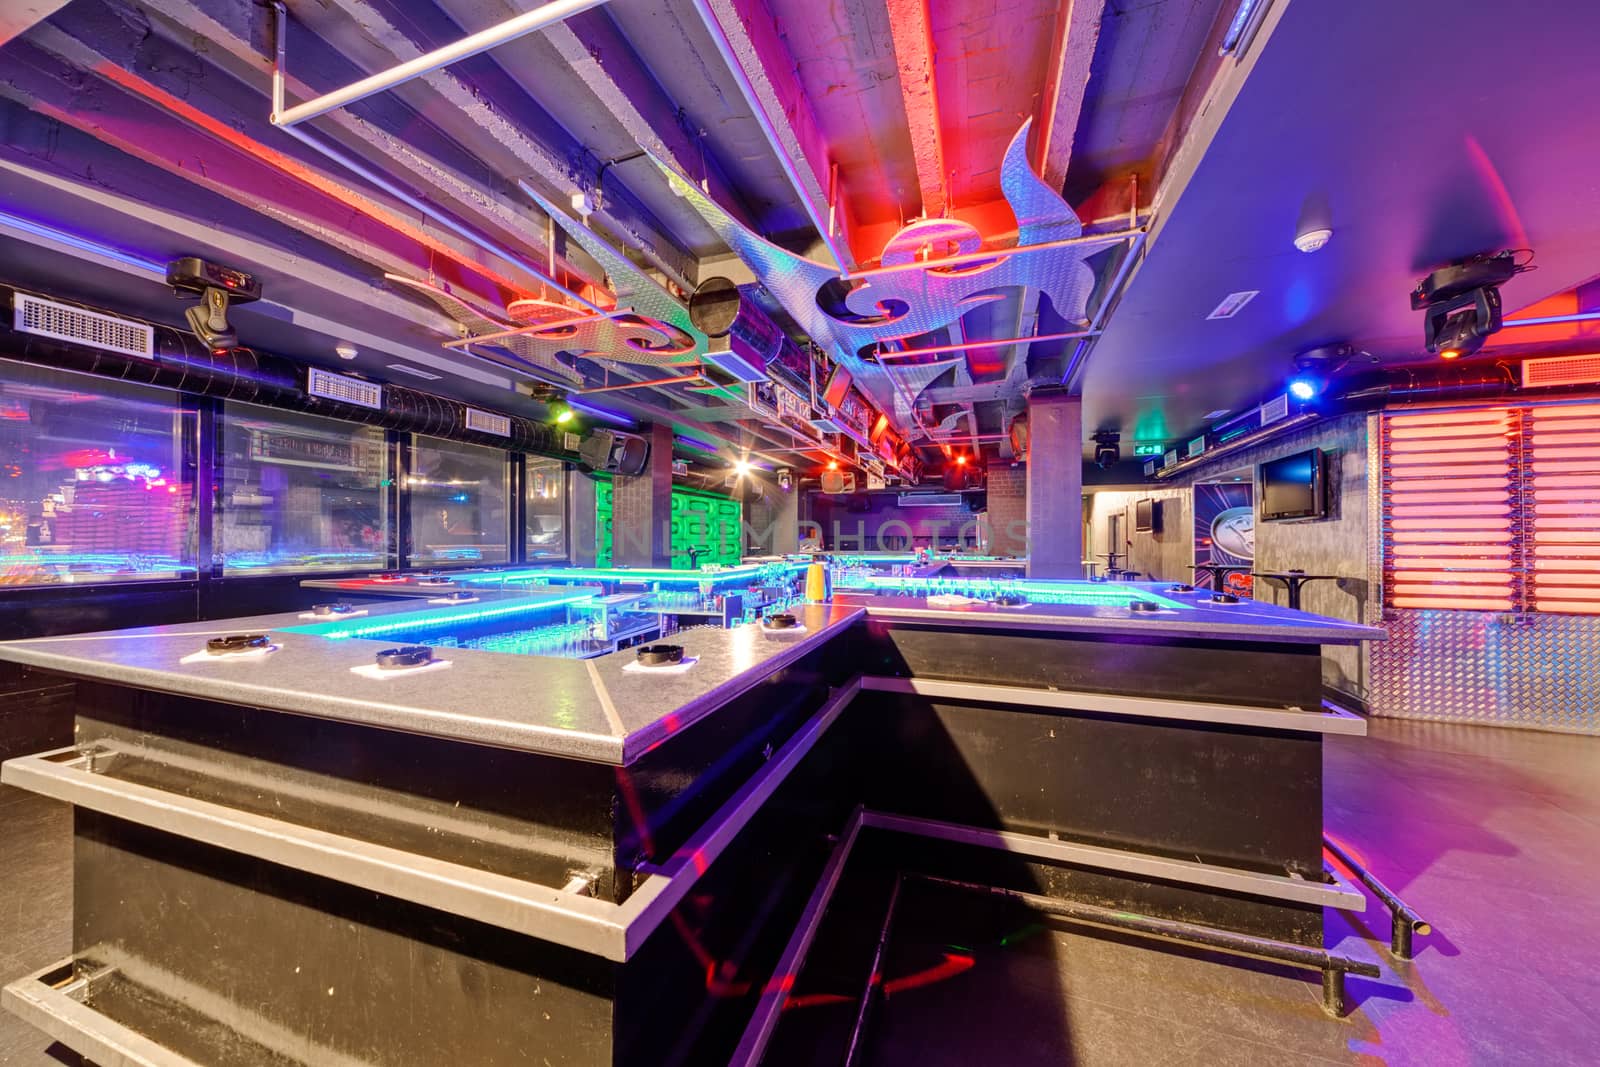 Interior of  night club with vivid colors